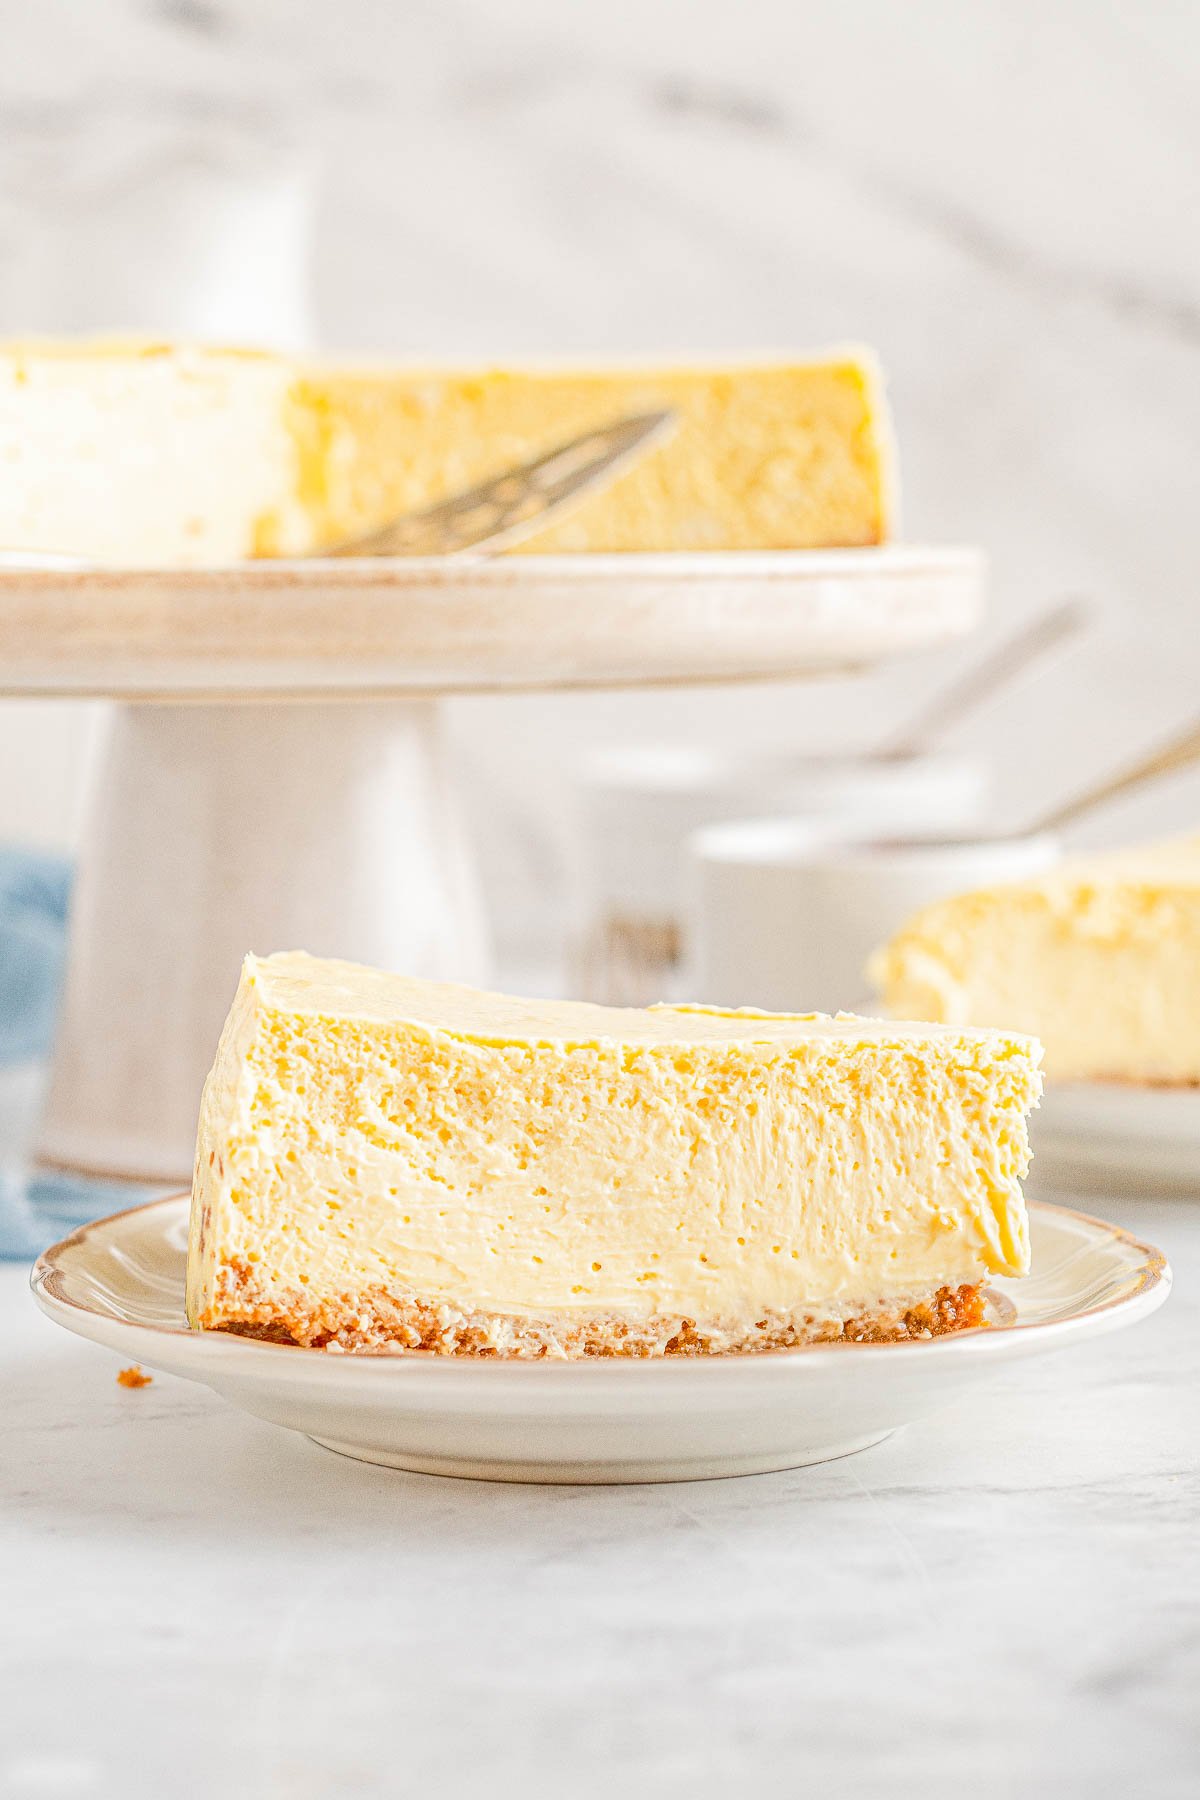 The Best Classic New York Cheesecake - Rich and decadent, creamy, sweet yet tangy, this is the BEST recipe for a classic New York style cheesecake with a buttery graham cracker crust! Impress your friends and family with this homemade cheesecake! Clear and easy directions are provided even if you’ve never made a cheesecake so yours turns out PERFECTLY.